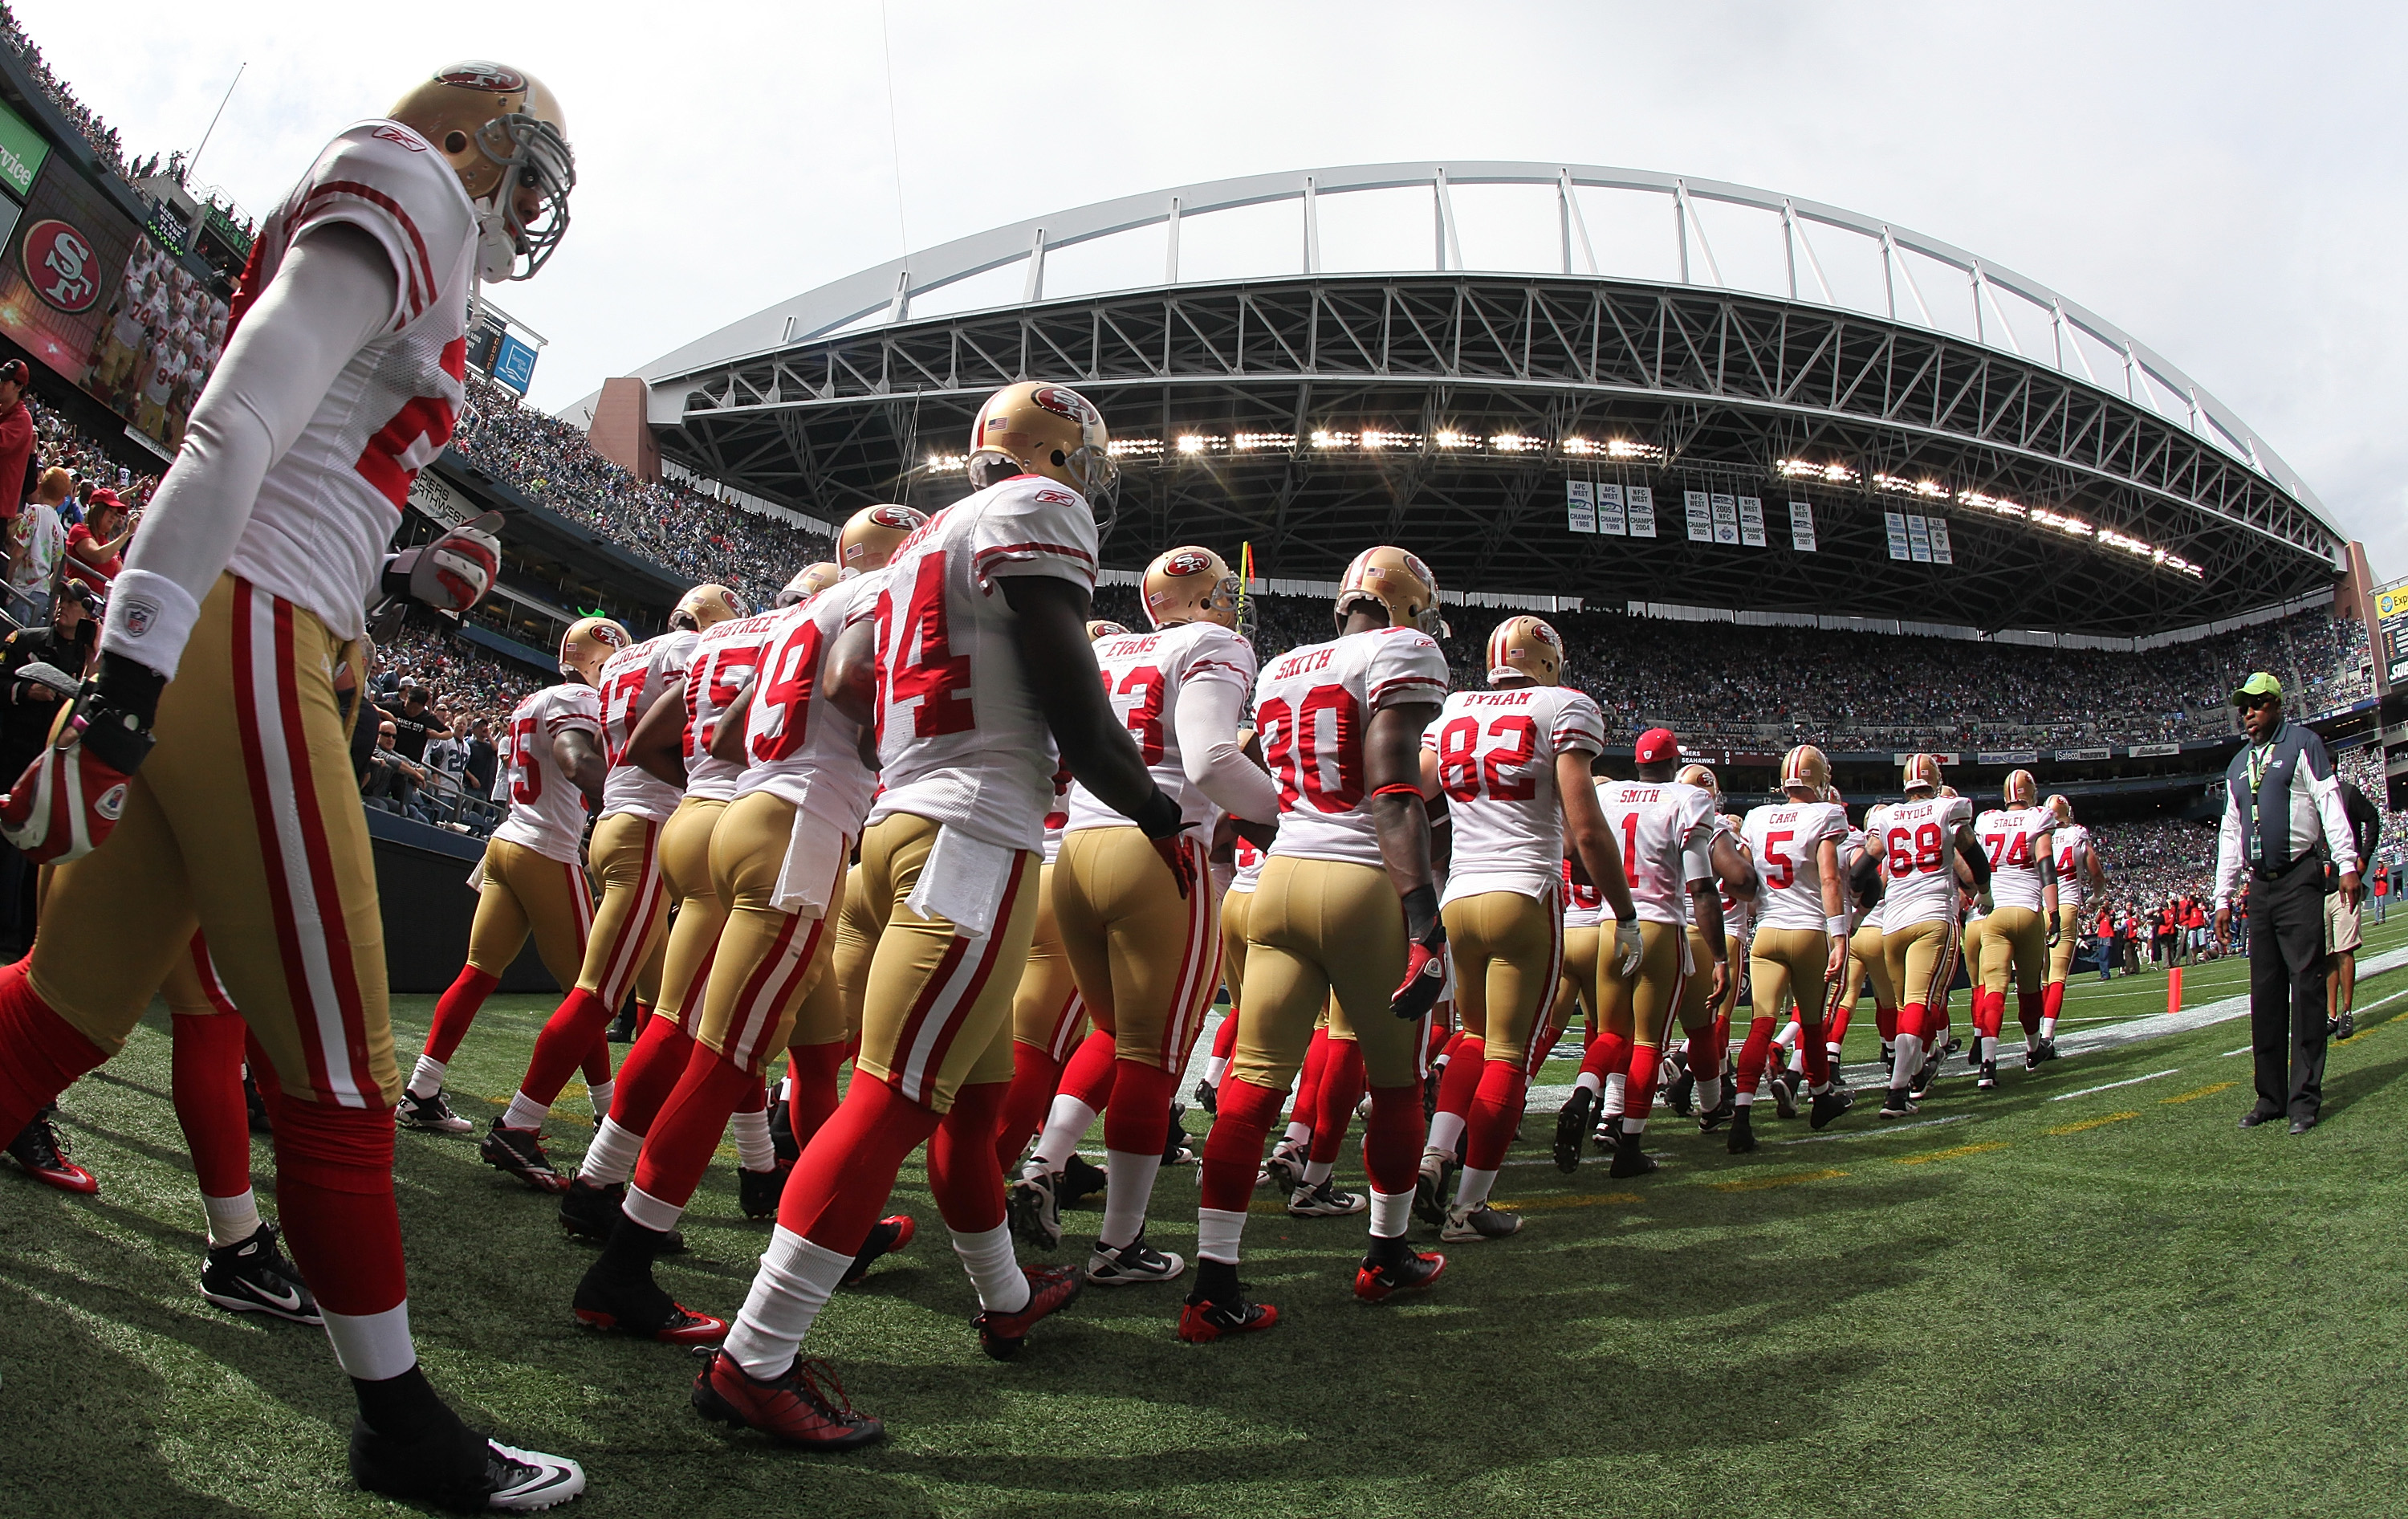 SEATTLE - SEPTEMBER 12:  Members of the San Francisco 49ers take the field prior to the NFL season opener against the Seattle Seahawks at Qwest Field on September 12, 2010 in Seattle, Washington. The Seahawks defeated the 49ers 31-6. (Photo by Otto Greule